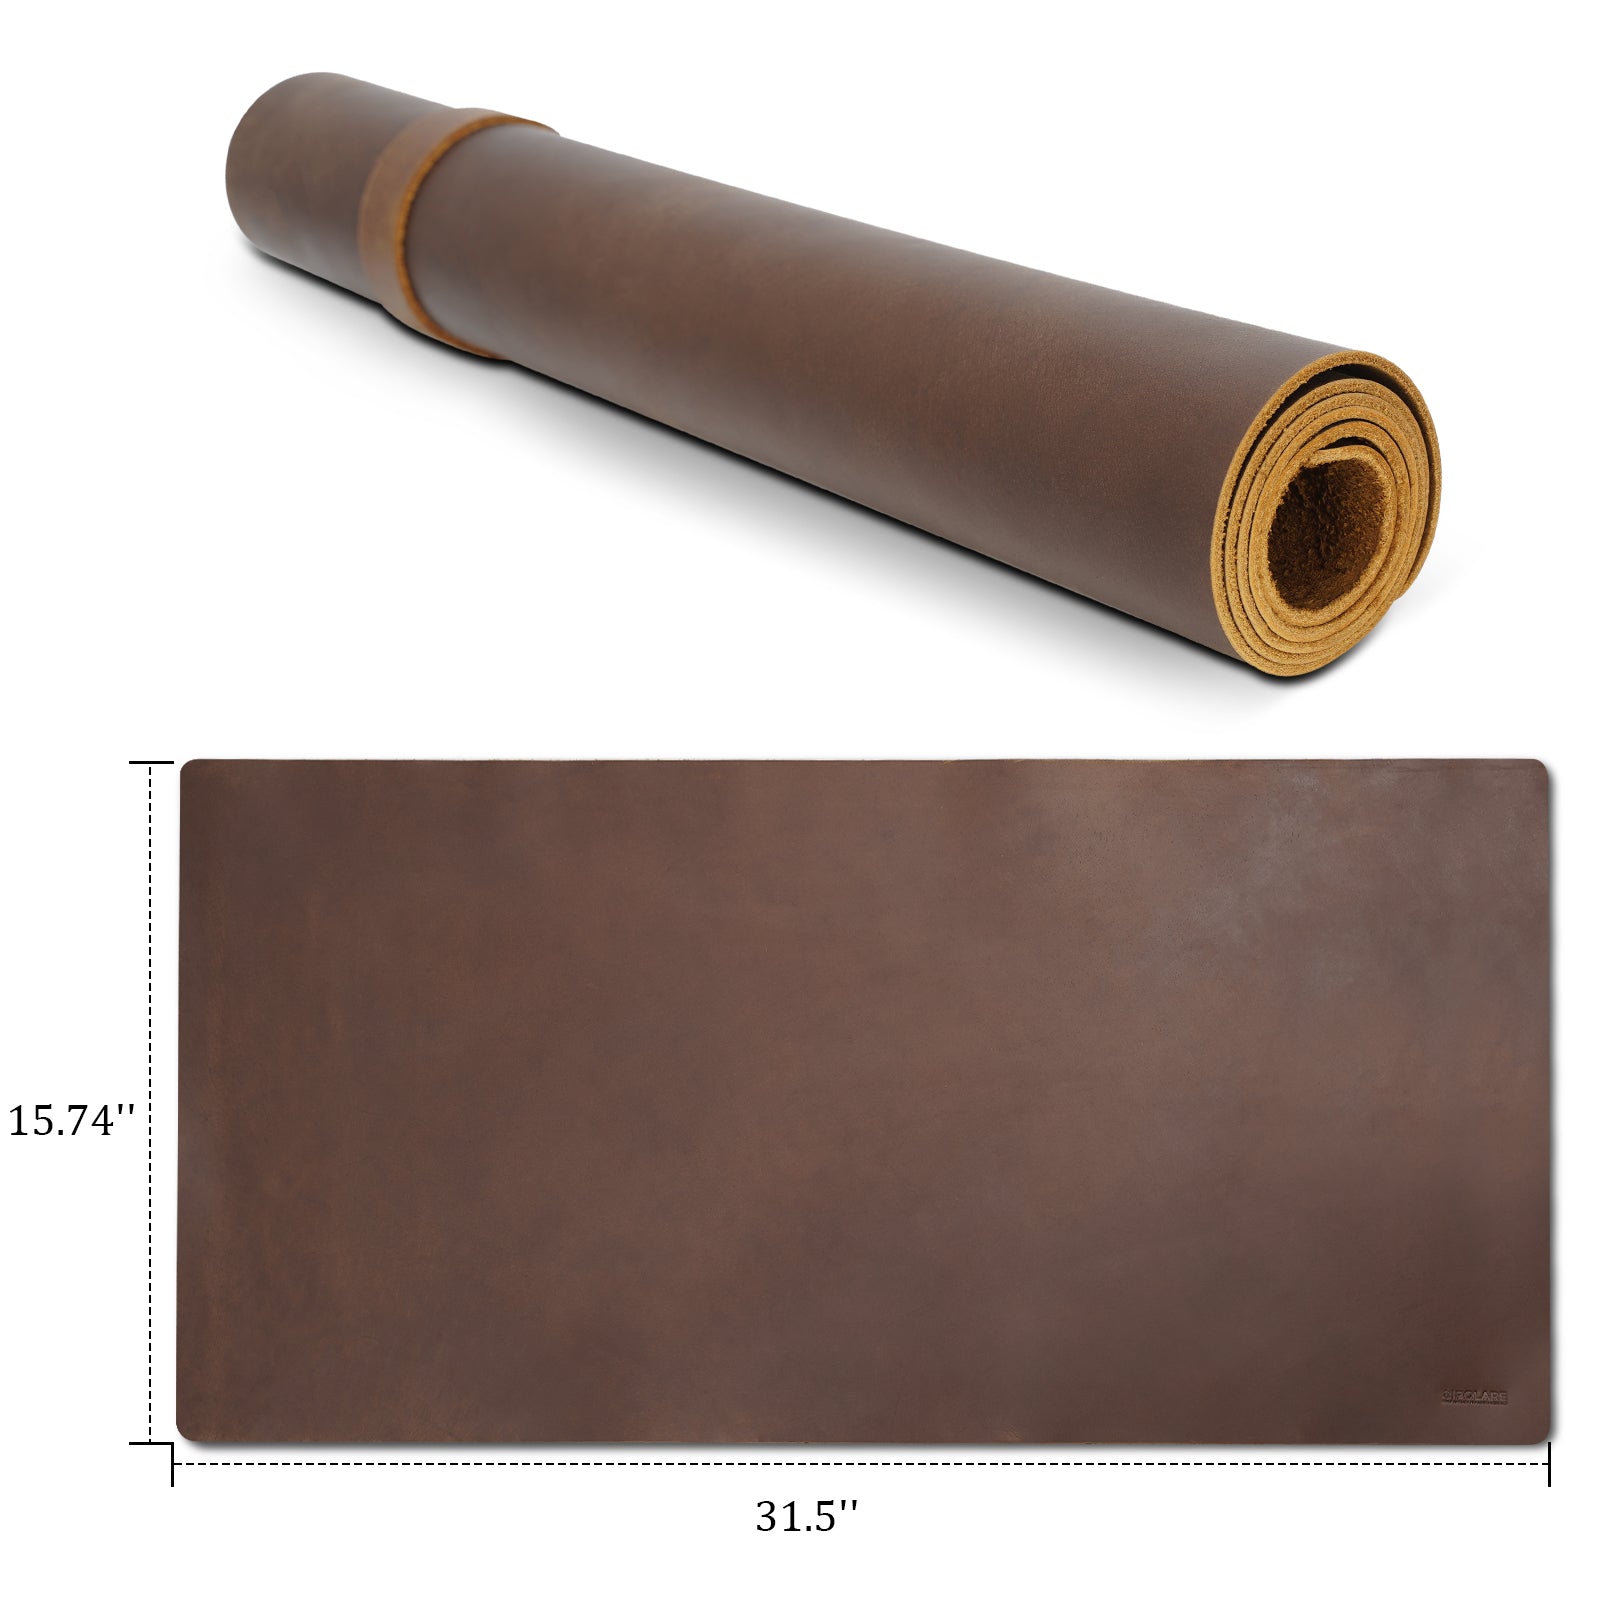 Polare 2mm Thick Full Grain Leather Desk Pad Protector 31.5 x 15.7 inch  Desktop Blotter Mats for Keyboard and Mouse Non-Slip Desk Writing Pad for